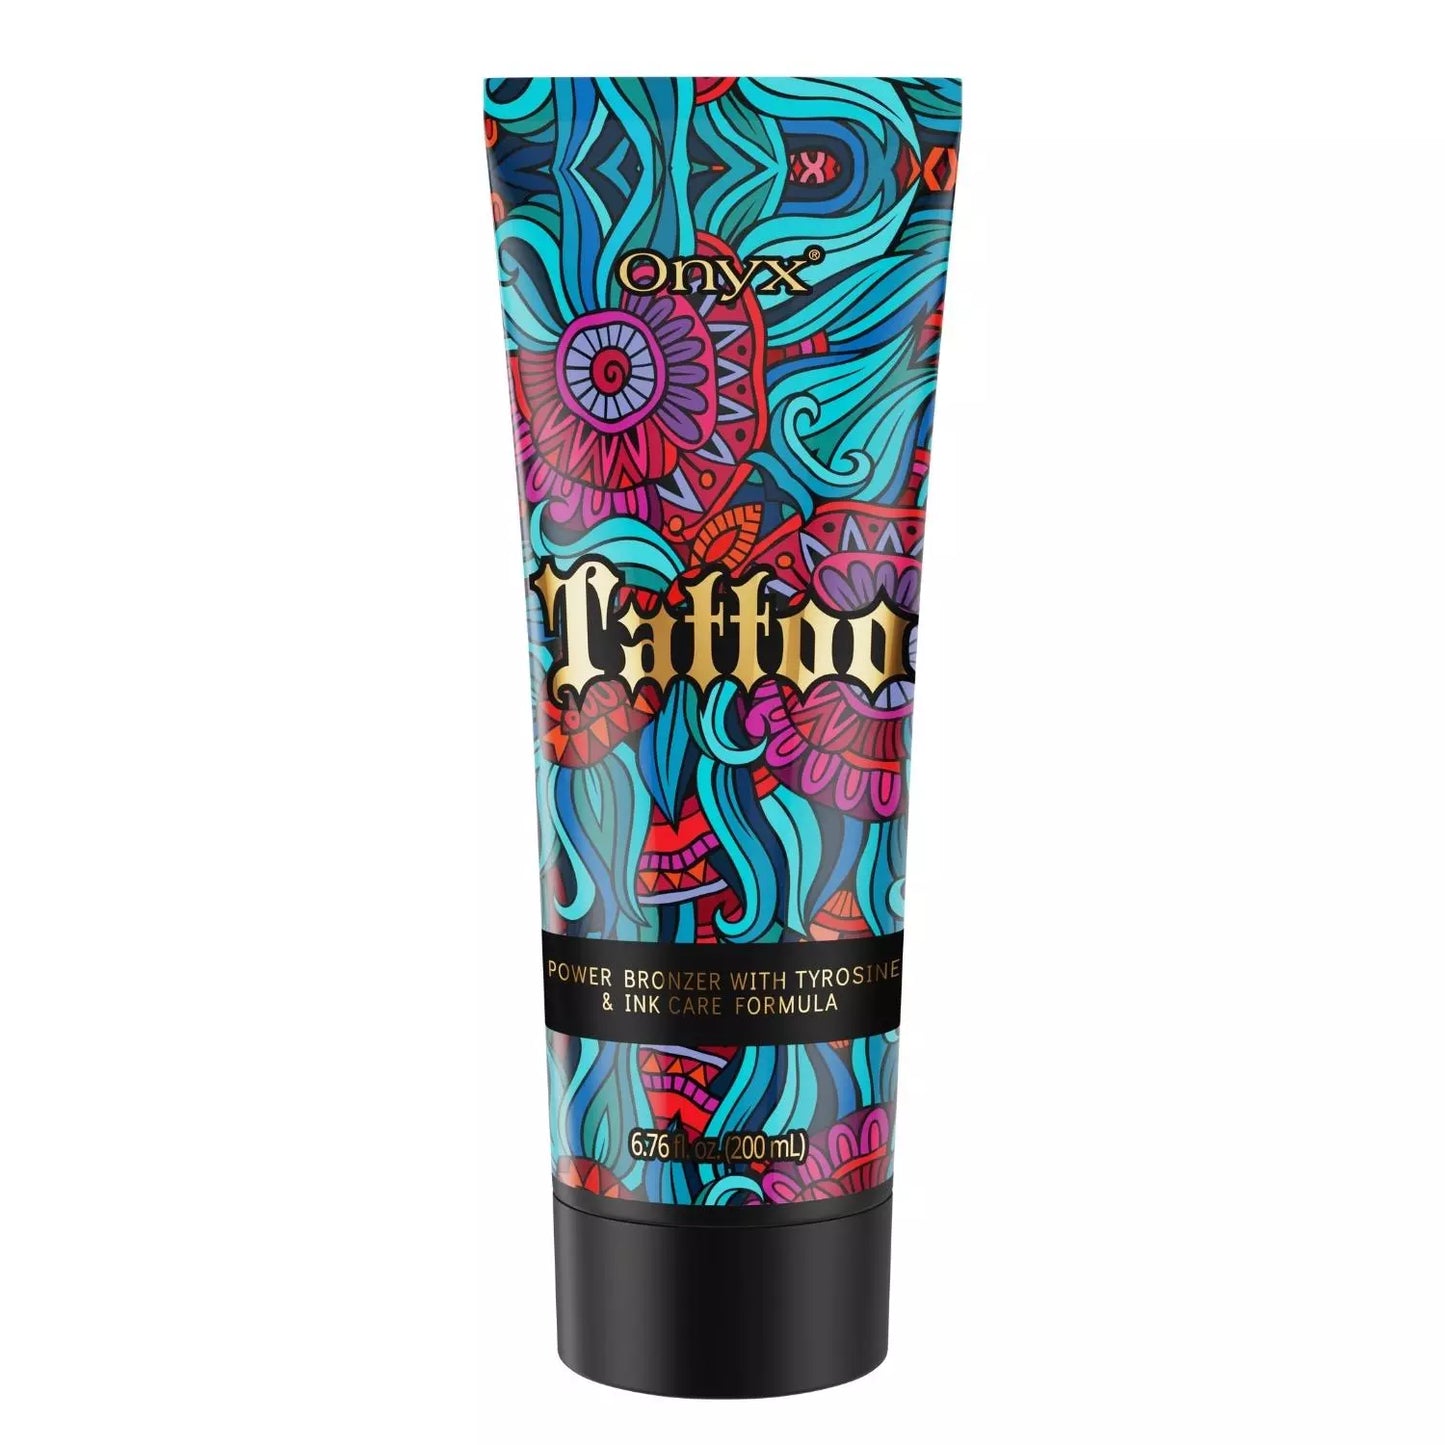 Tattoo tanning lotion protecting tattoos from tanning